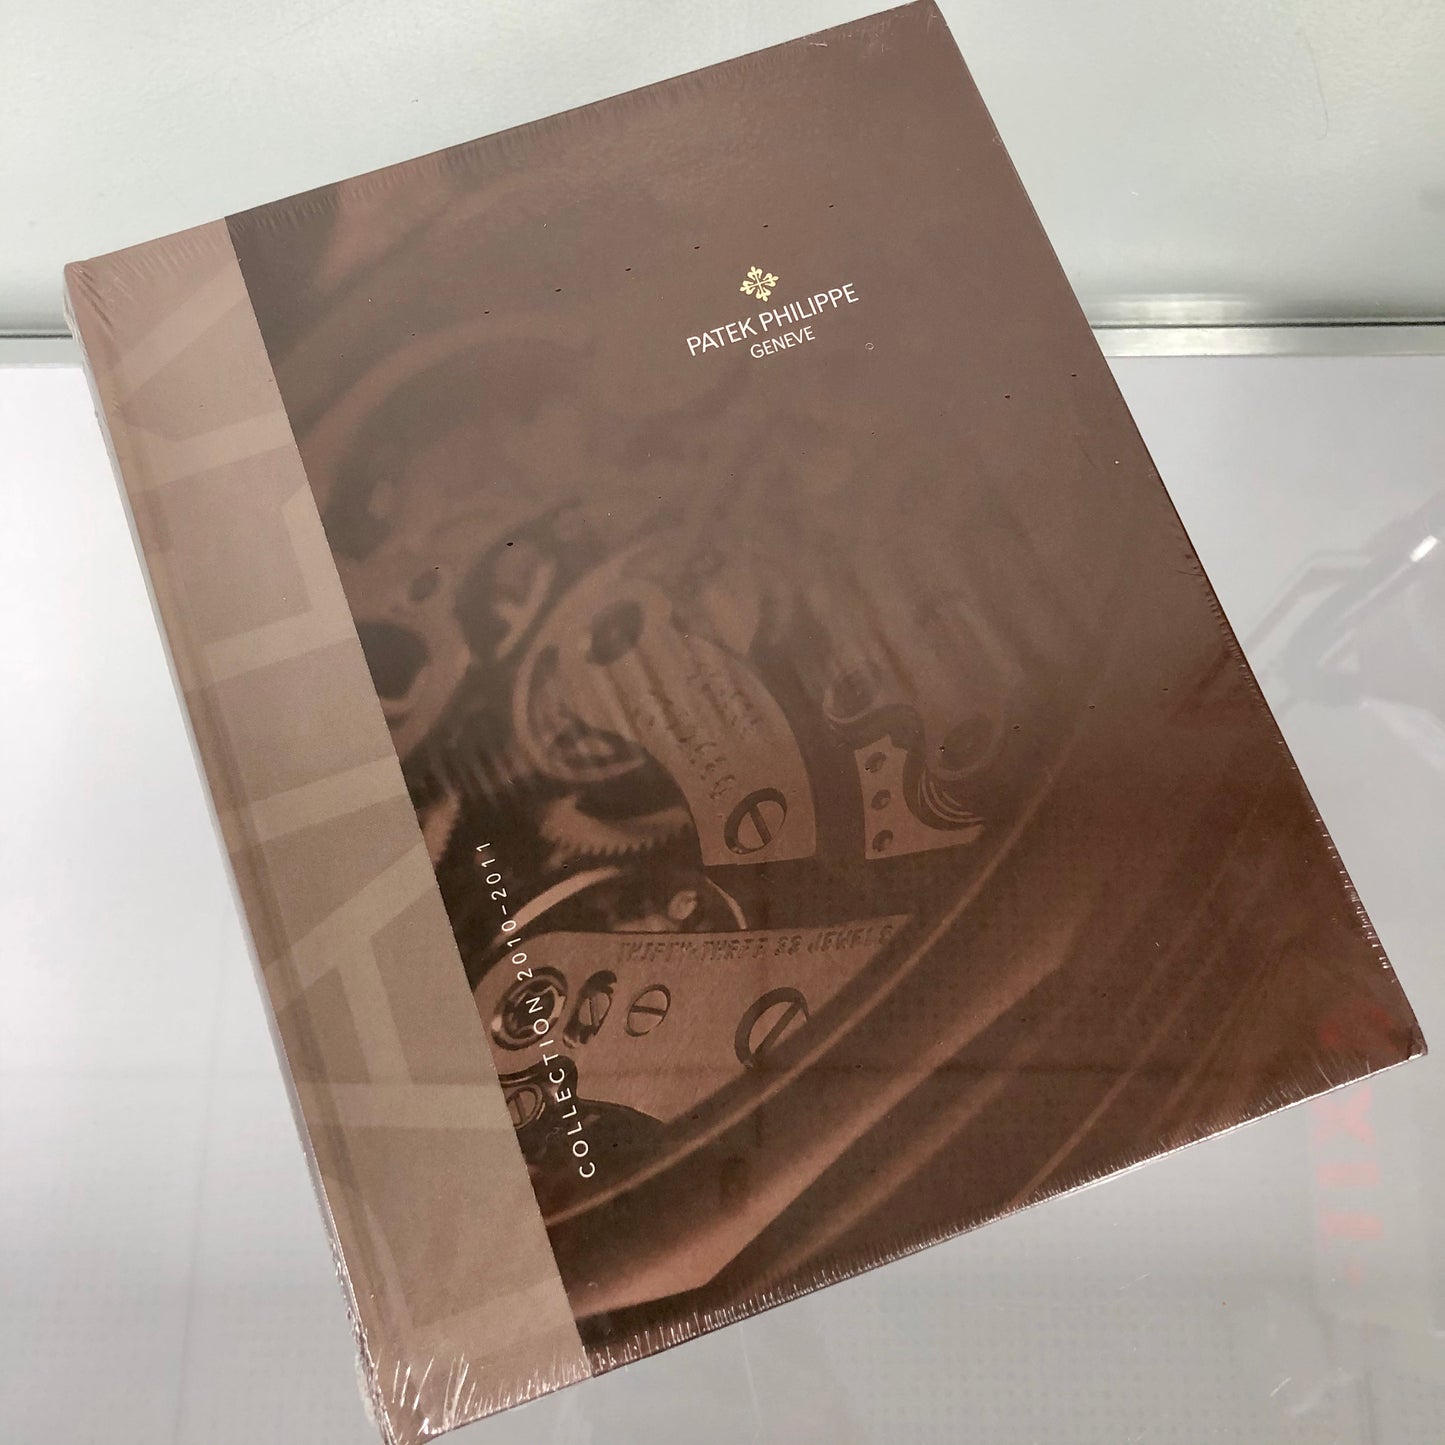 New PATEK PHILIPPE Genève Collection 2010-2011 Collectable Table Book